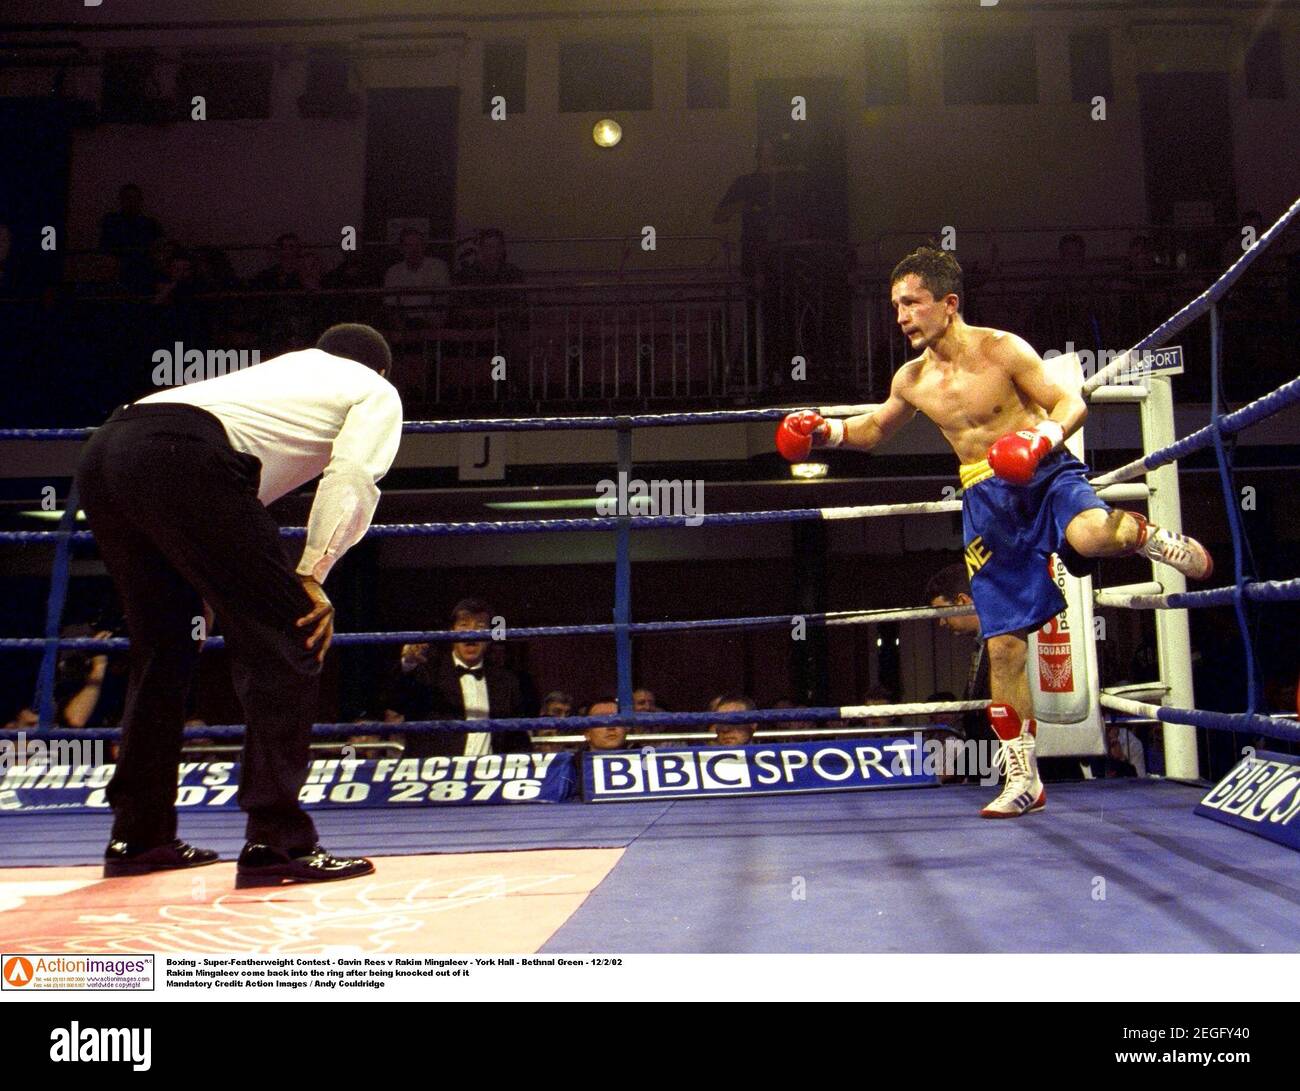 Boxing - Super-Featherweight Contest - Gavin Rees v Rakim Mingaleev - York  Hall - Bethnal Green - 12/2/02 Rakim Mingaleev come back into the ring  after being knocked out of it Mandatory